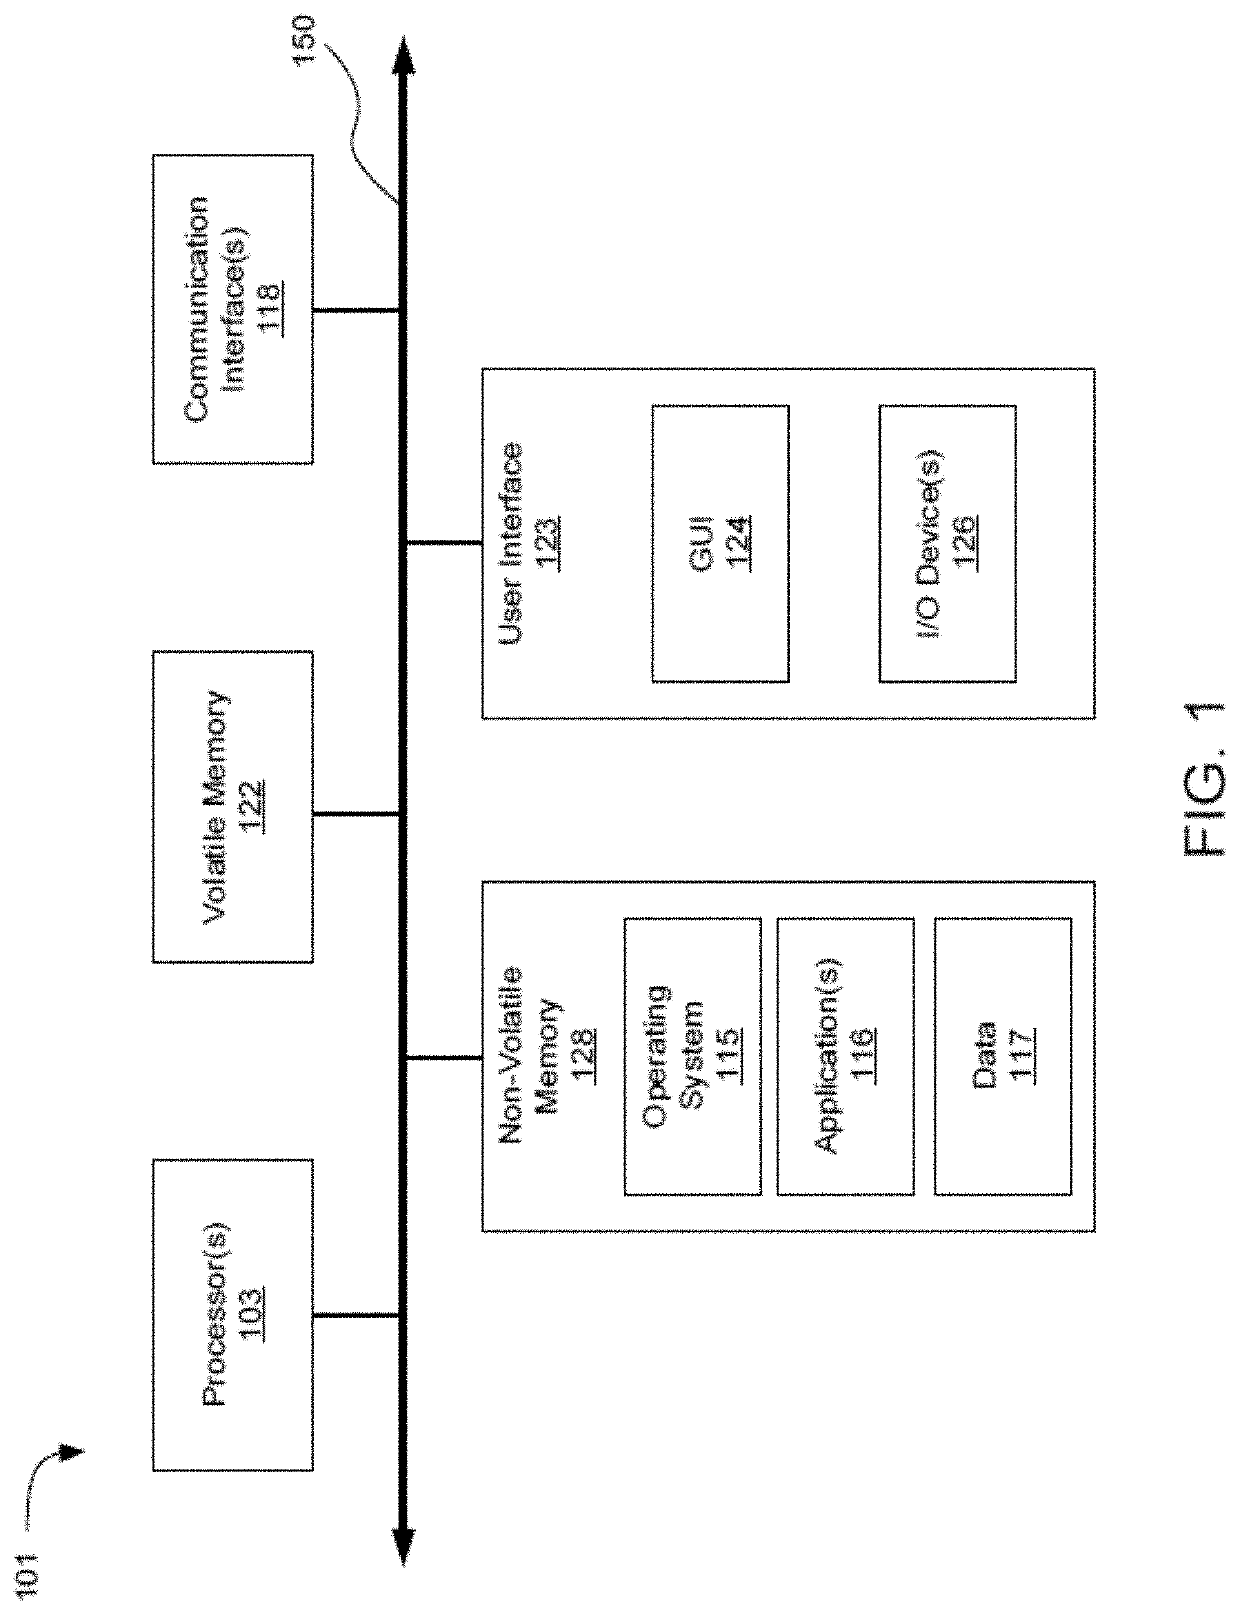 Systems and methods for multilink wan connectivity for saas applications